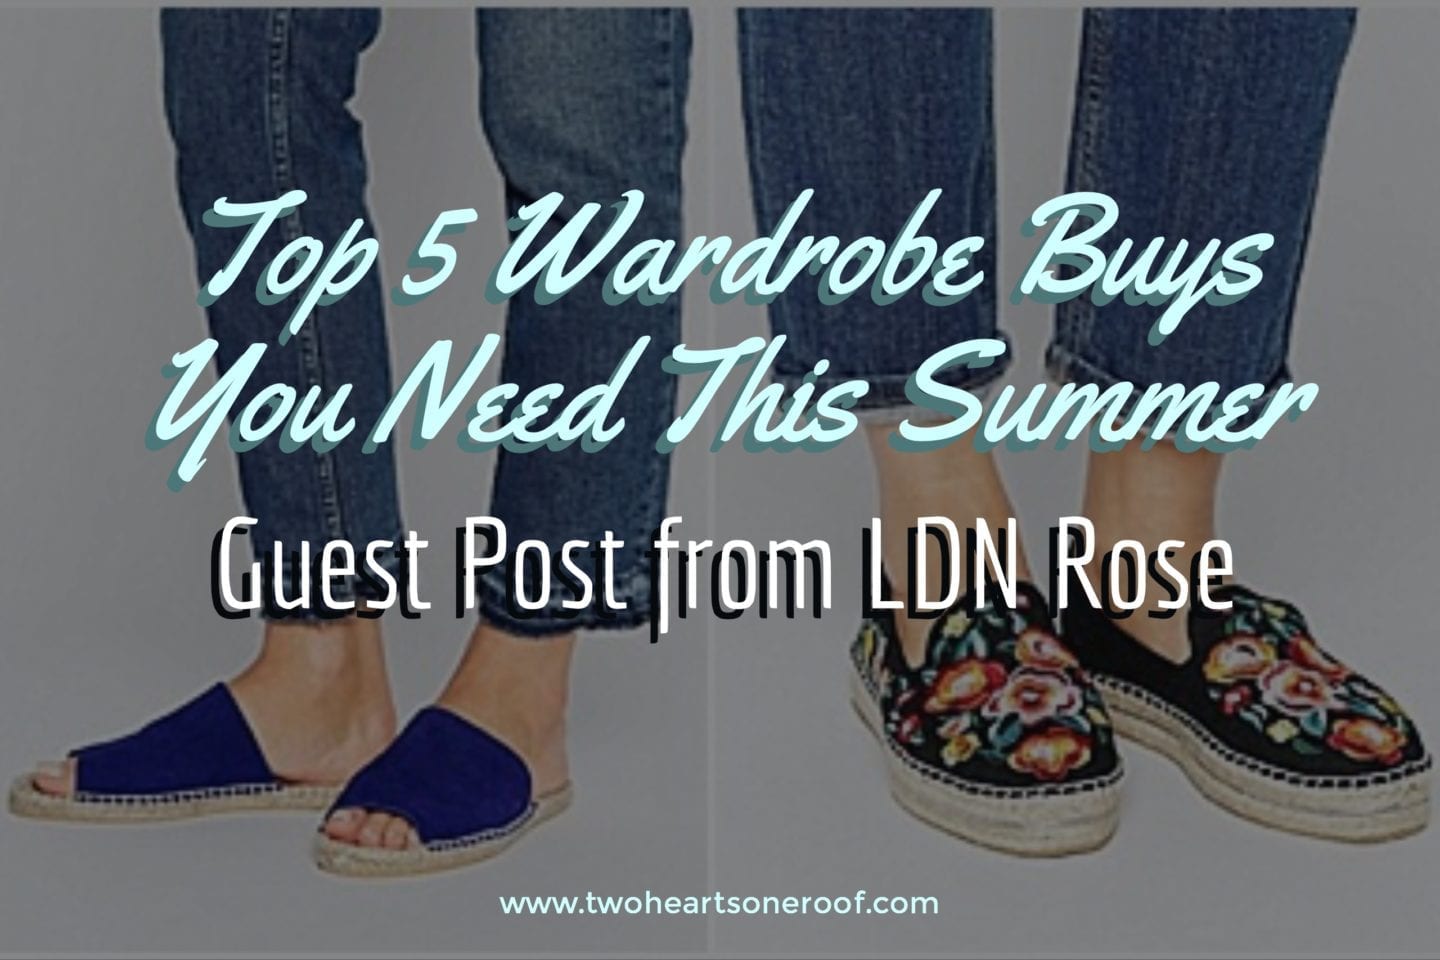 Guest Post from LDN Rose – Top 5 Wardrobe Buys You Need This Summer